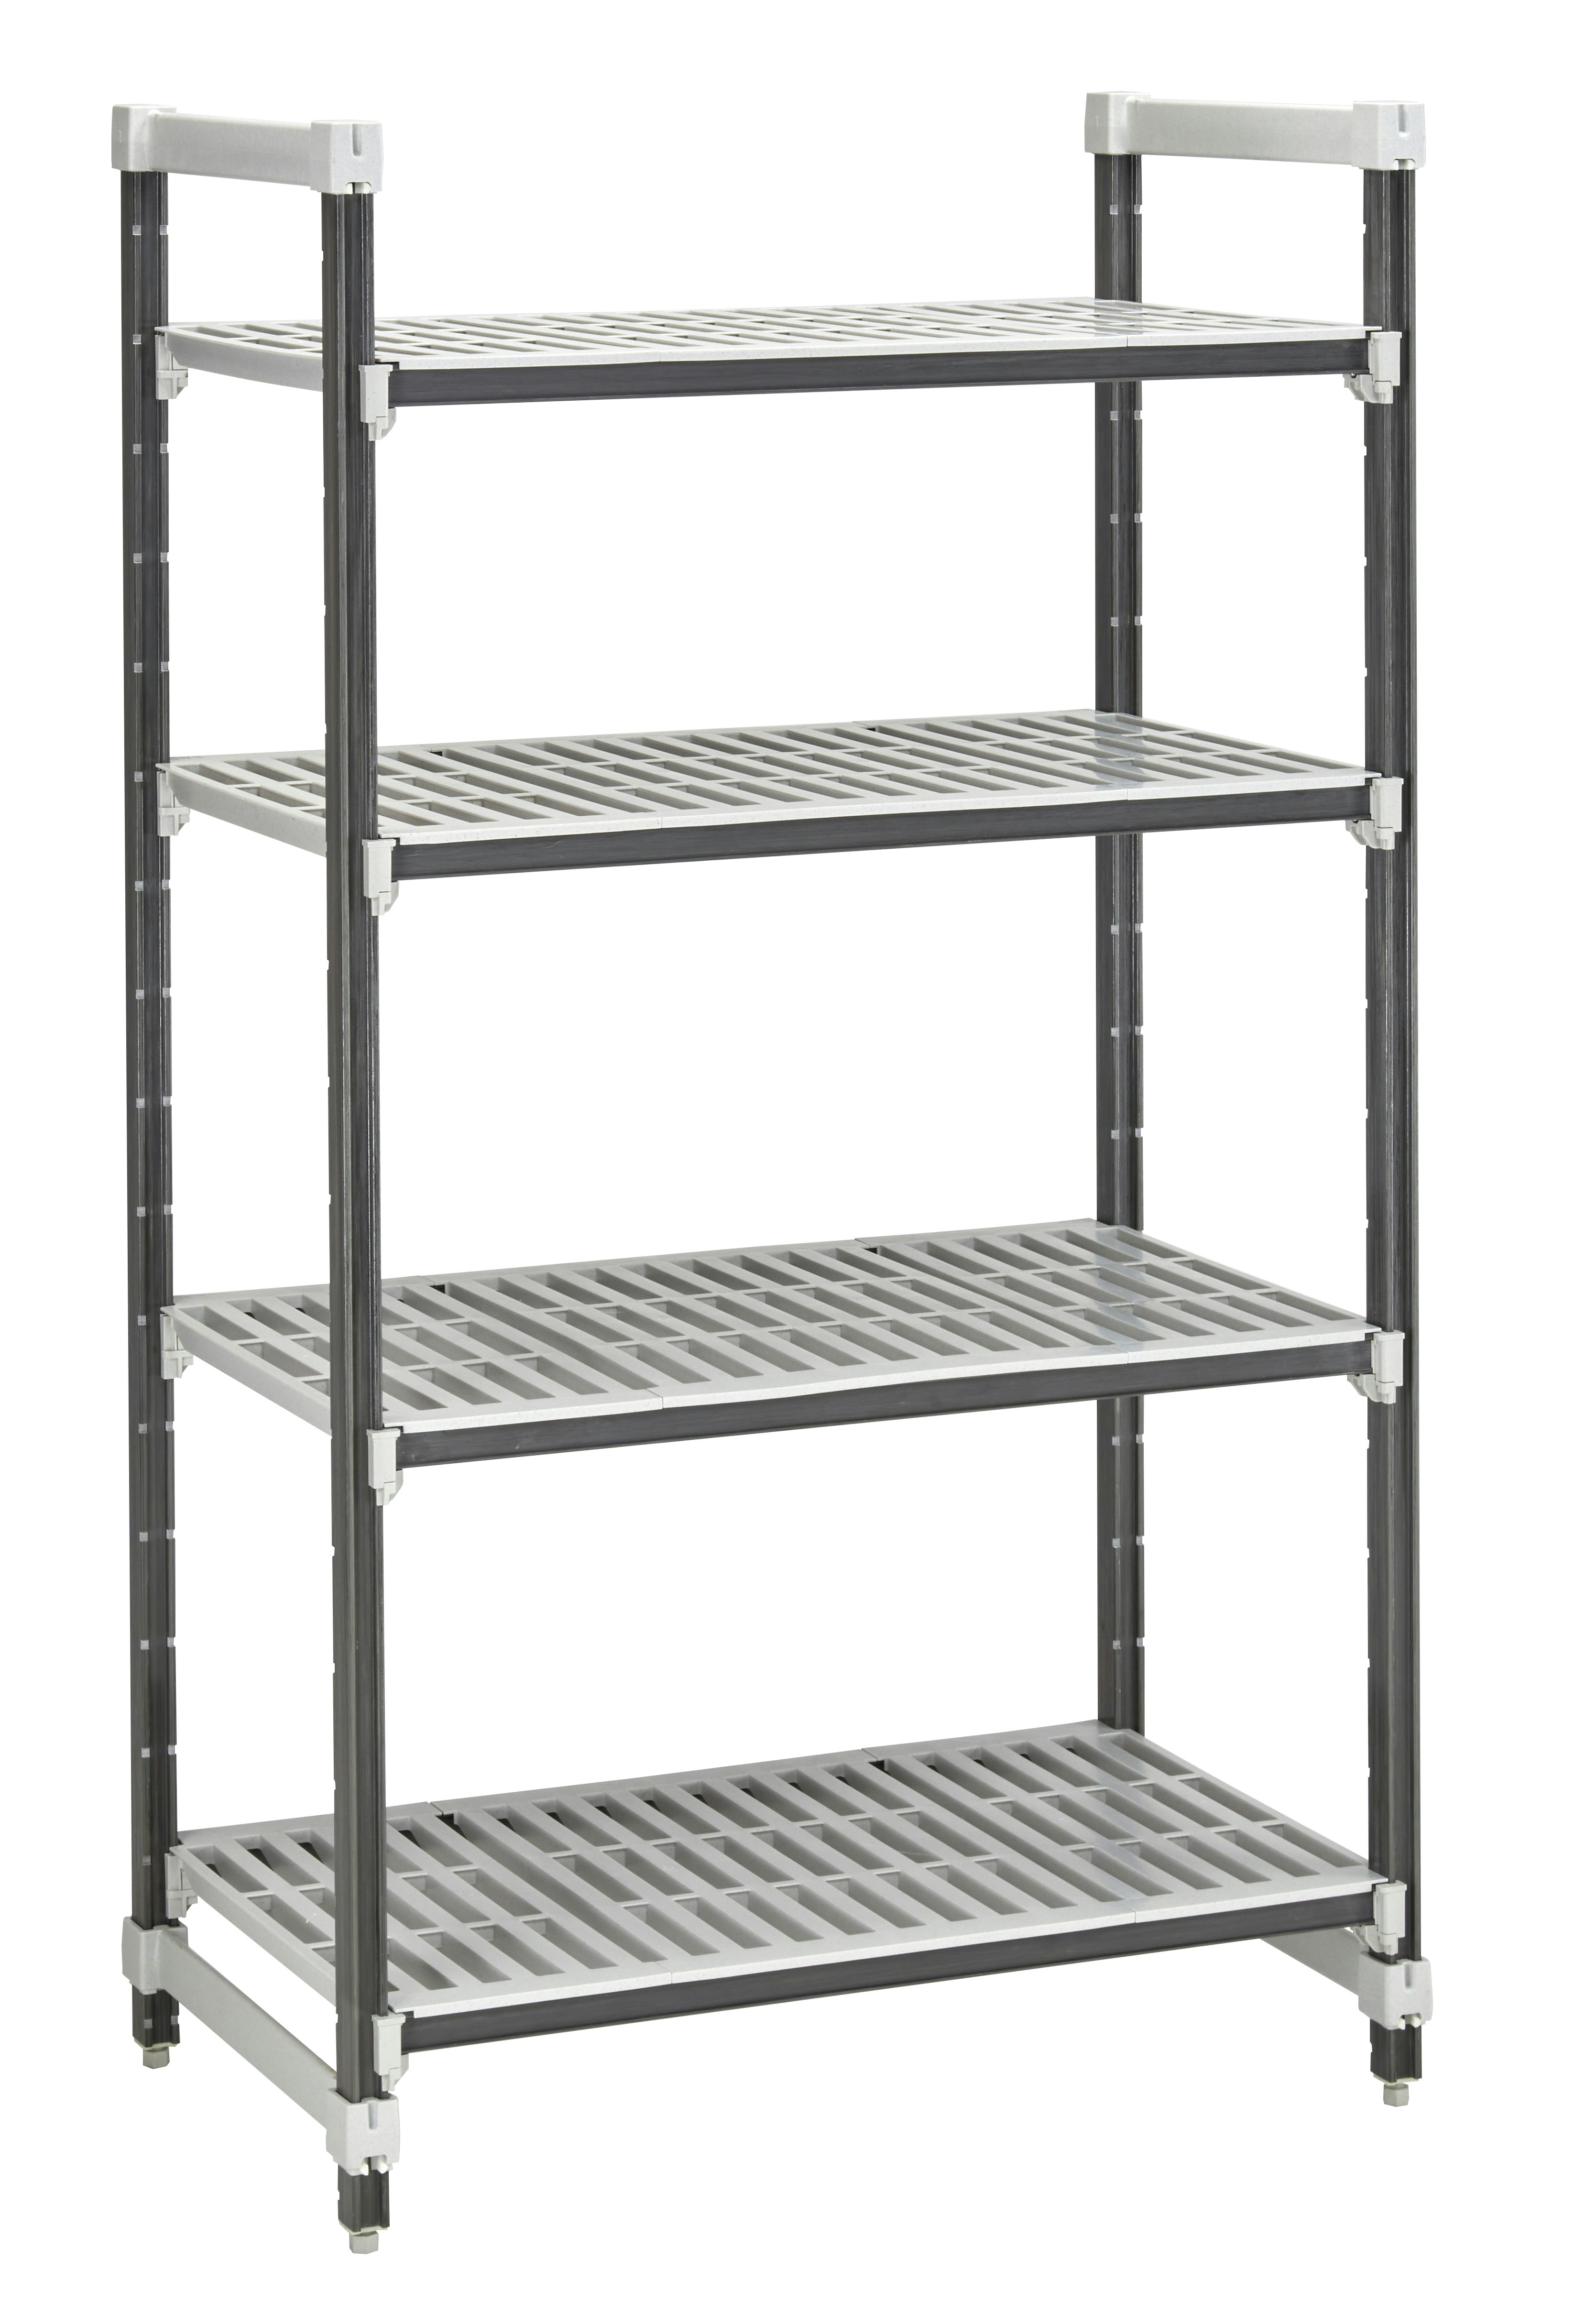 Elements XTRA Series Stationary Starter Units - Vented Shelves